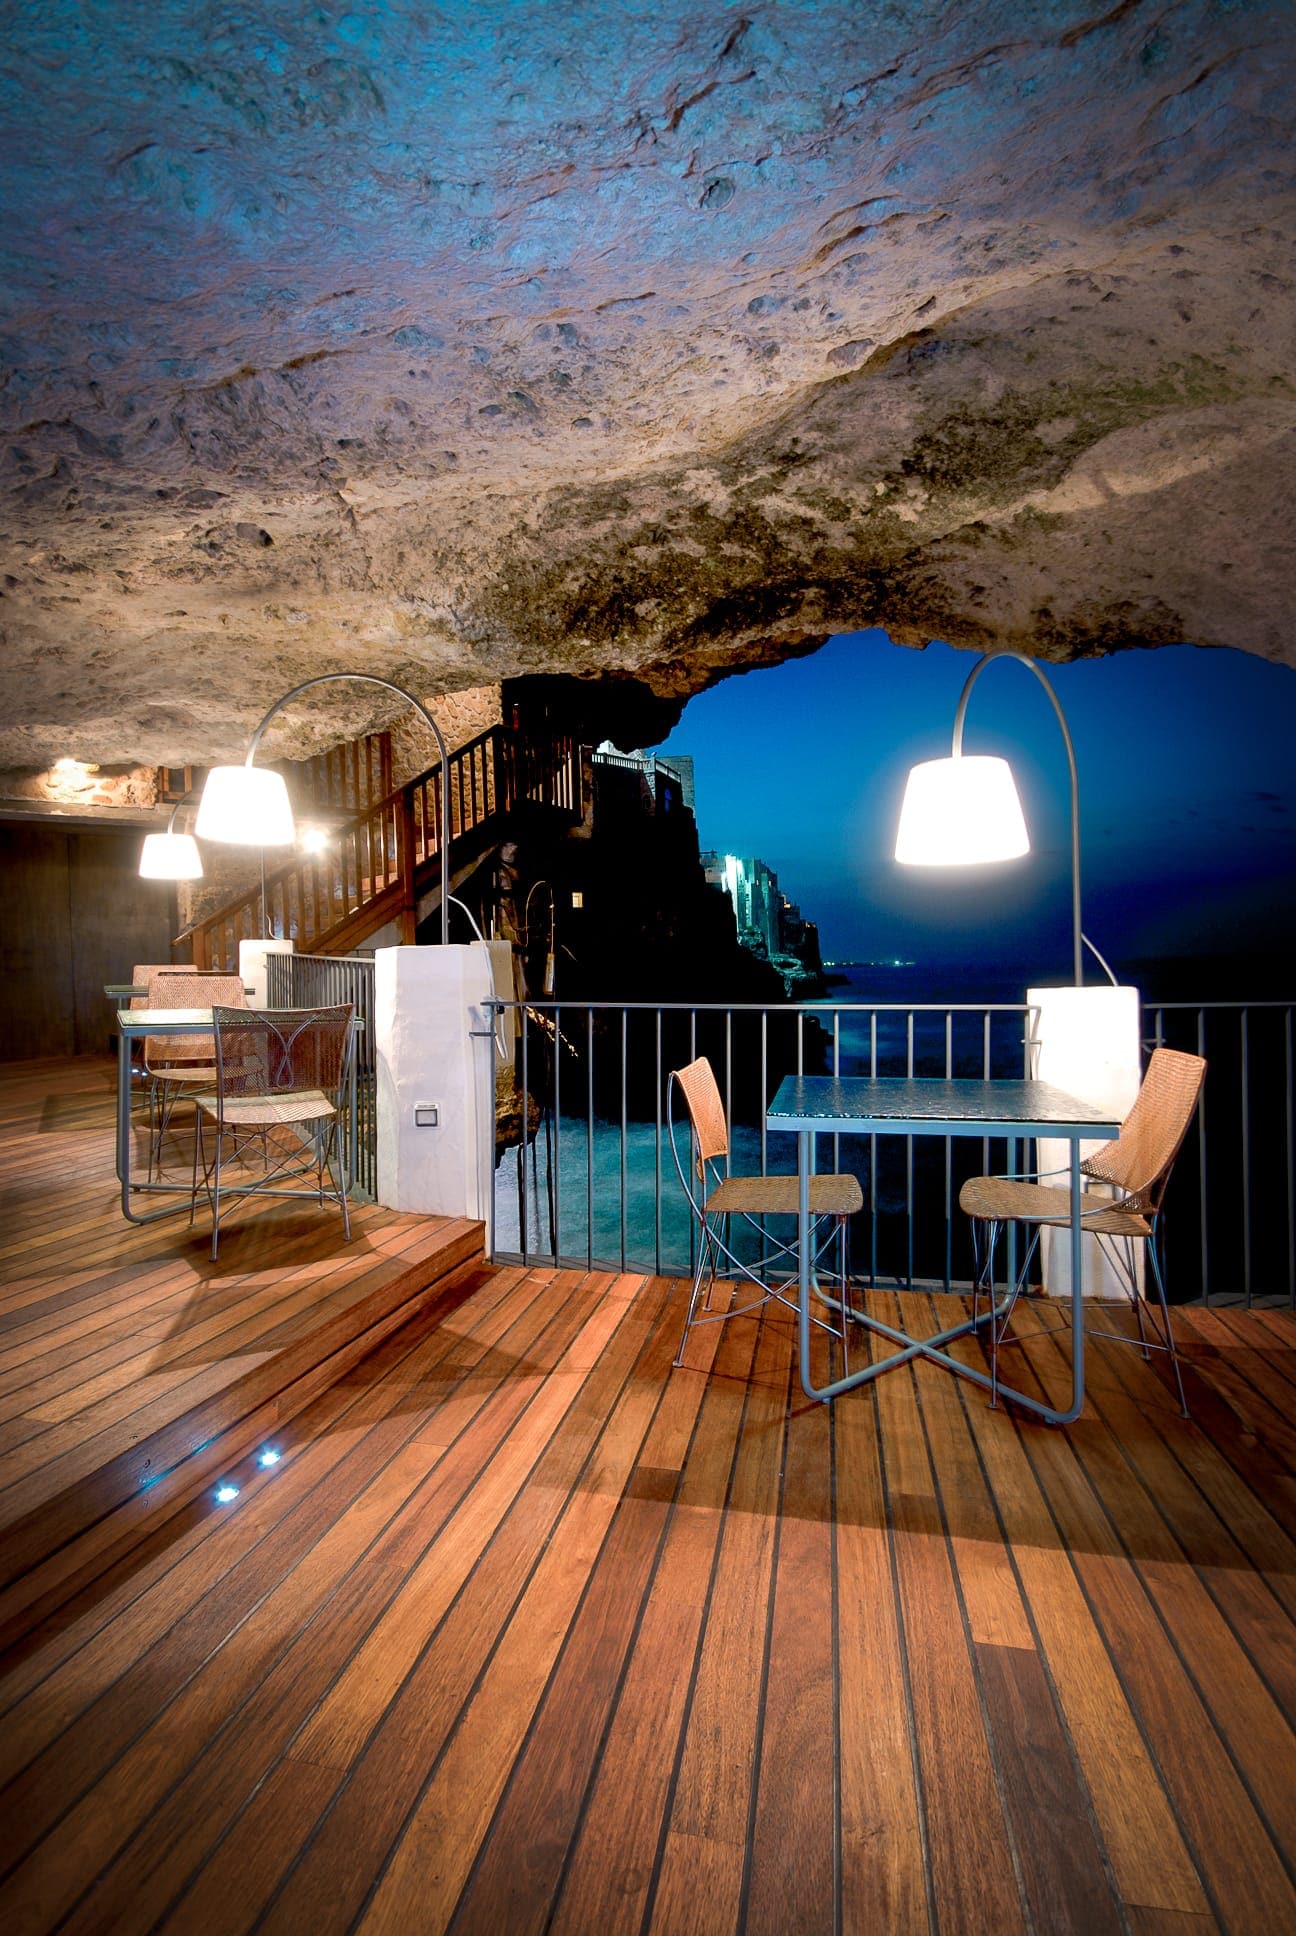 Incredible Restaurant Hostel Grotta Palazzese in Bari Italy next to the see luxury romatic restaurant with softline merbau shipdeck joint